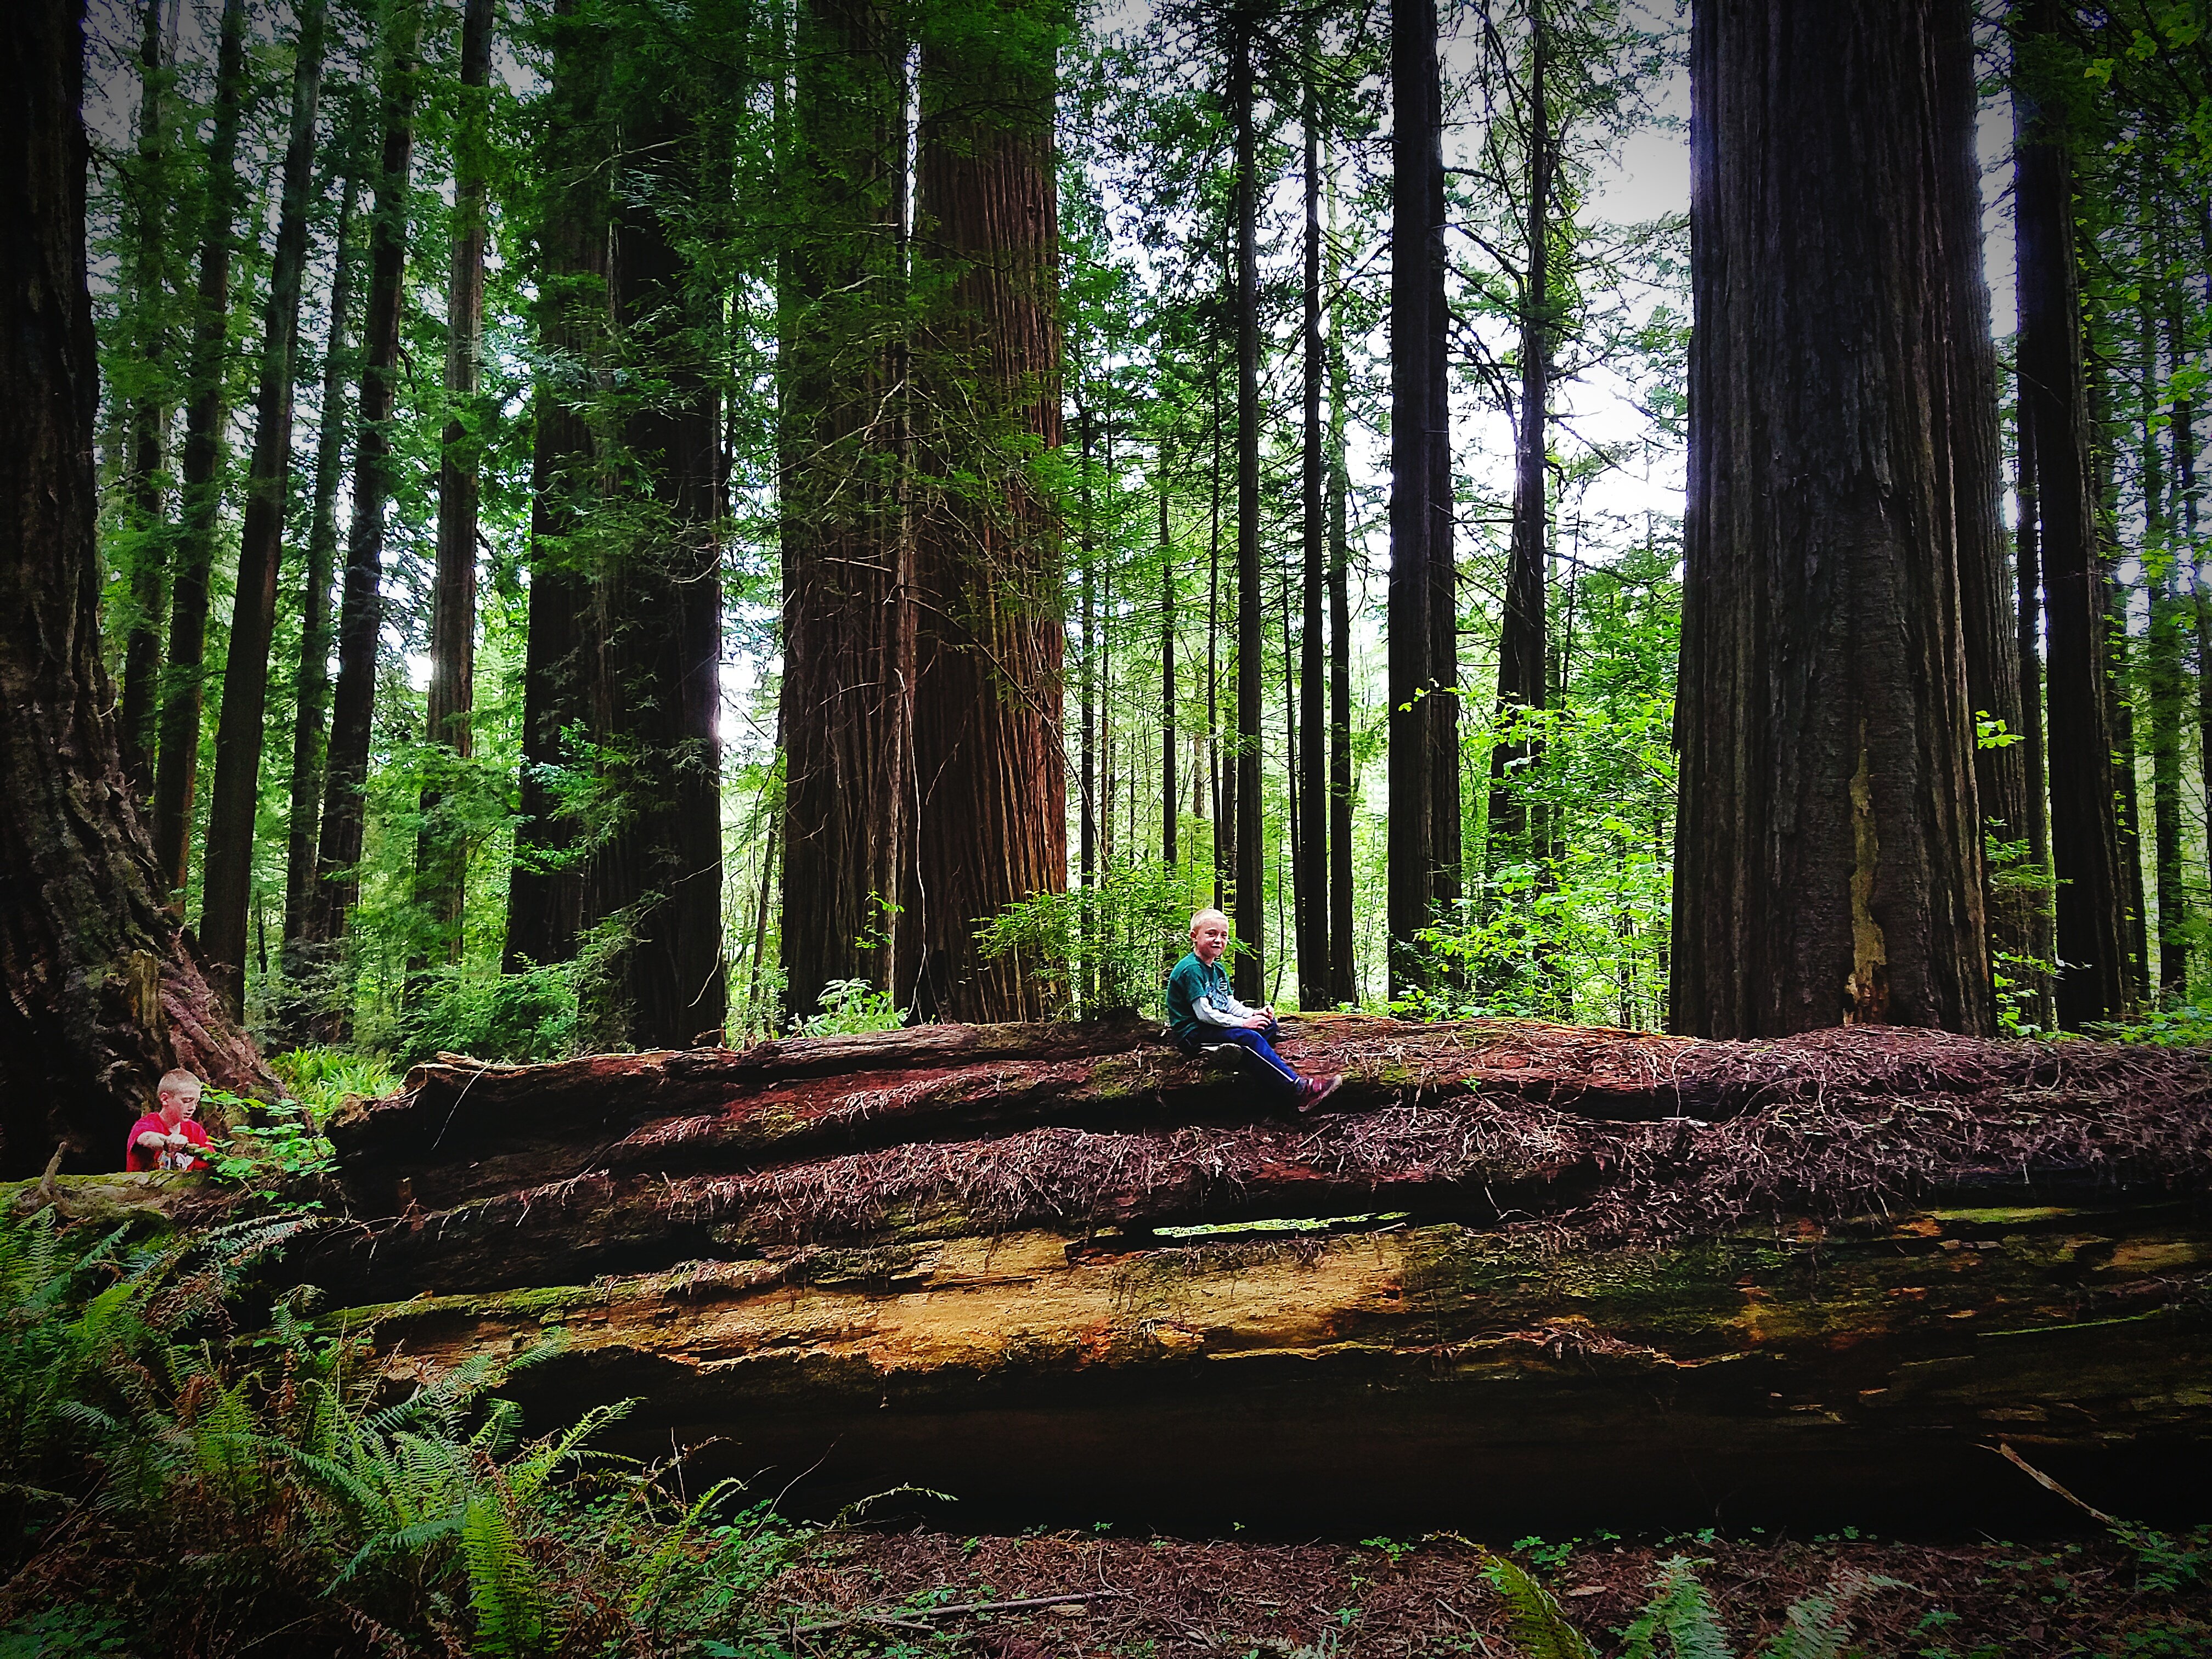 Photo of a boy sitting on log against trees in forest | Photo: Getty Images